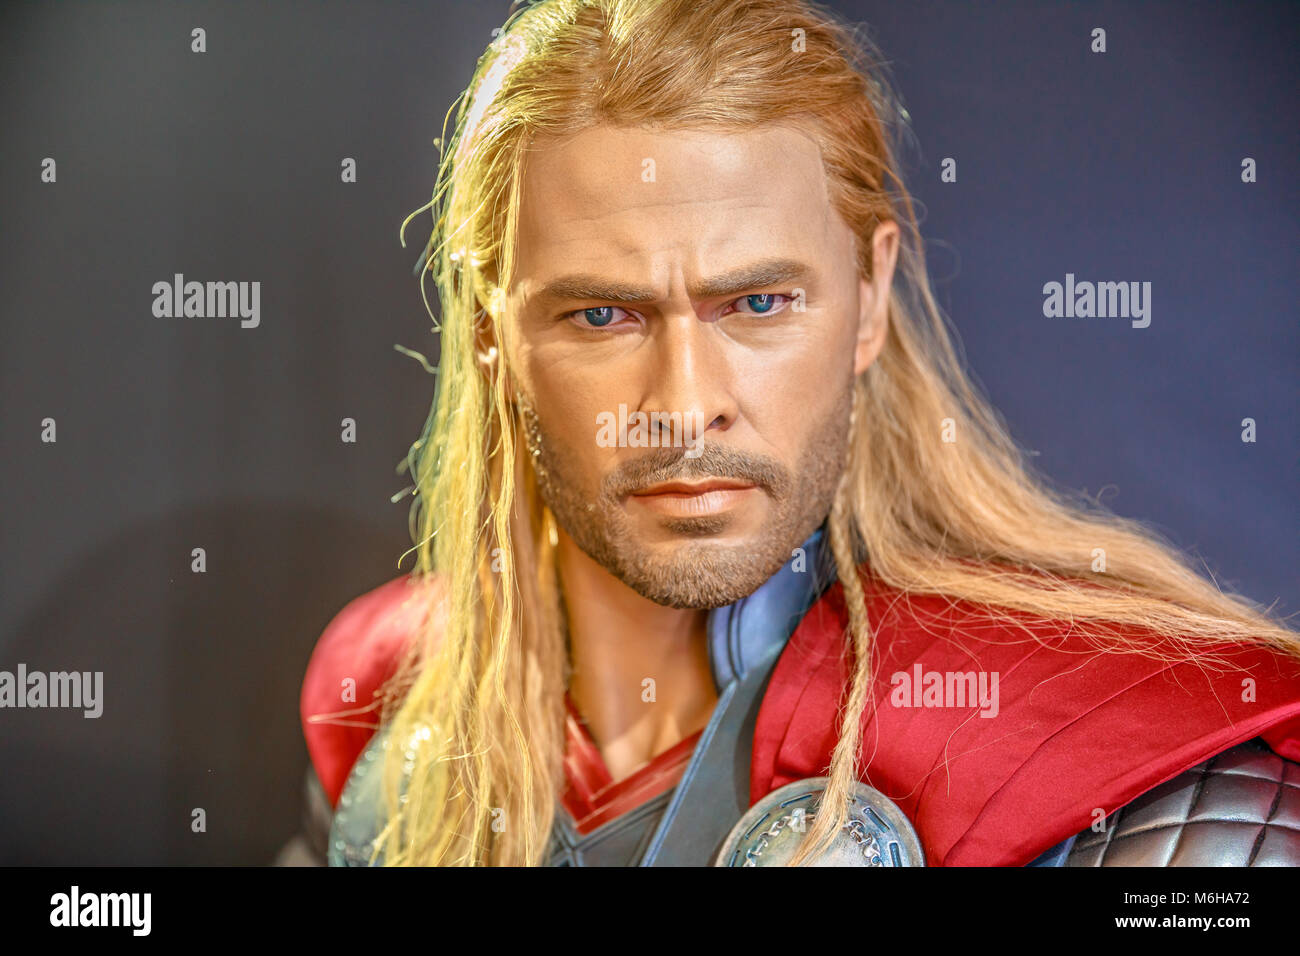 Tokyo, Japan - April 20, 2017: portrait of Thor, the God of Thunder model with from Age of Heroes movie at Mori Tower, Roppongi Hills complex, Minato Tokyo.Thor is a comics character by Marvel Comics. Stock Photo